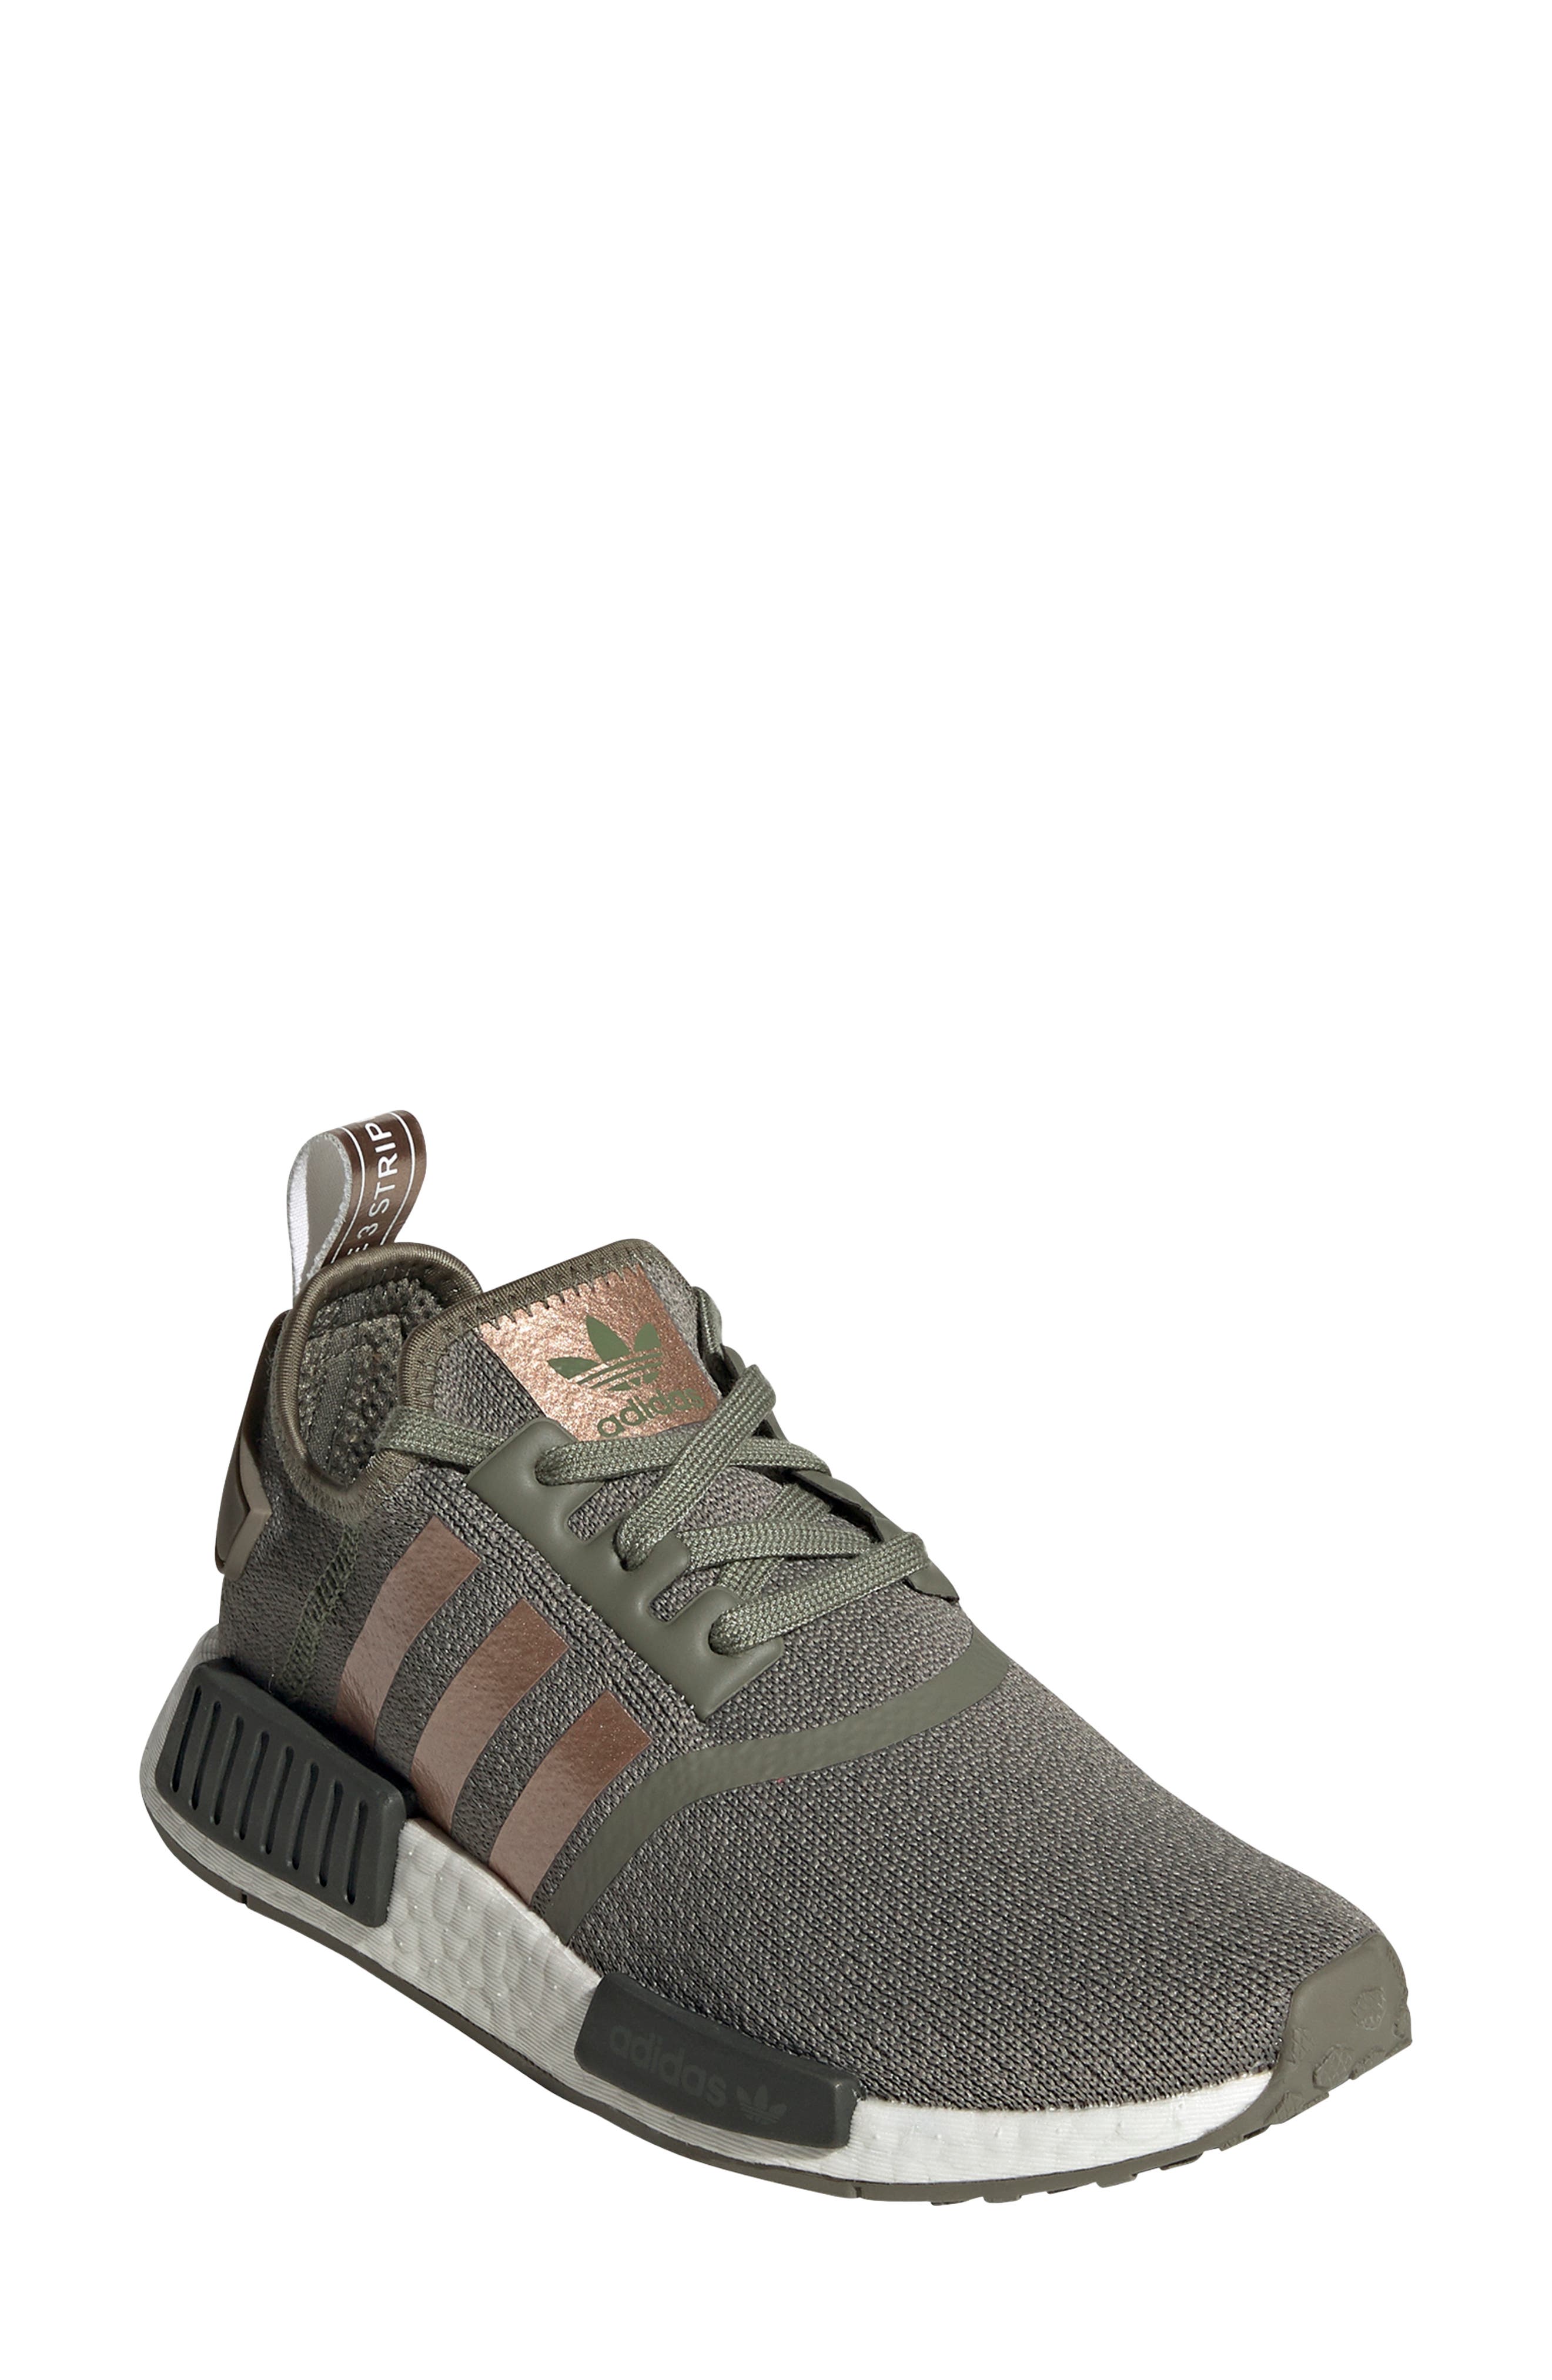 kalv Ulykke lindring Adidas Originals Nmd R1 Sneaker In Legacy Green/ Copper/ Earth | ModeSens